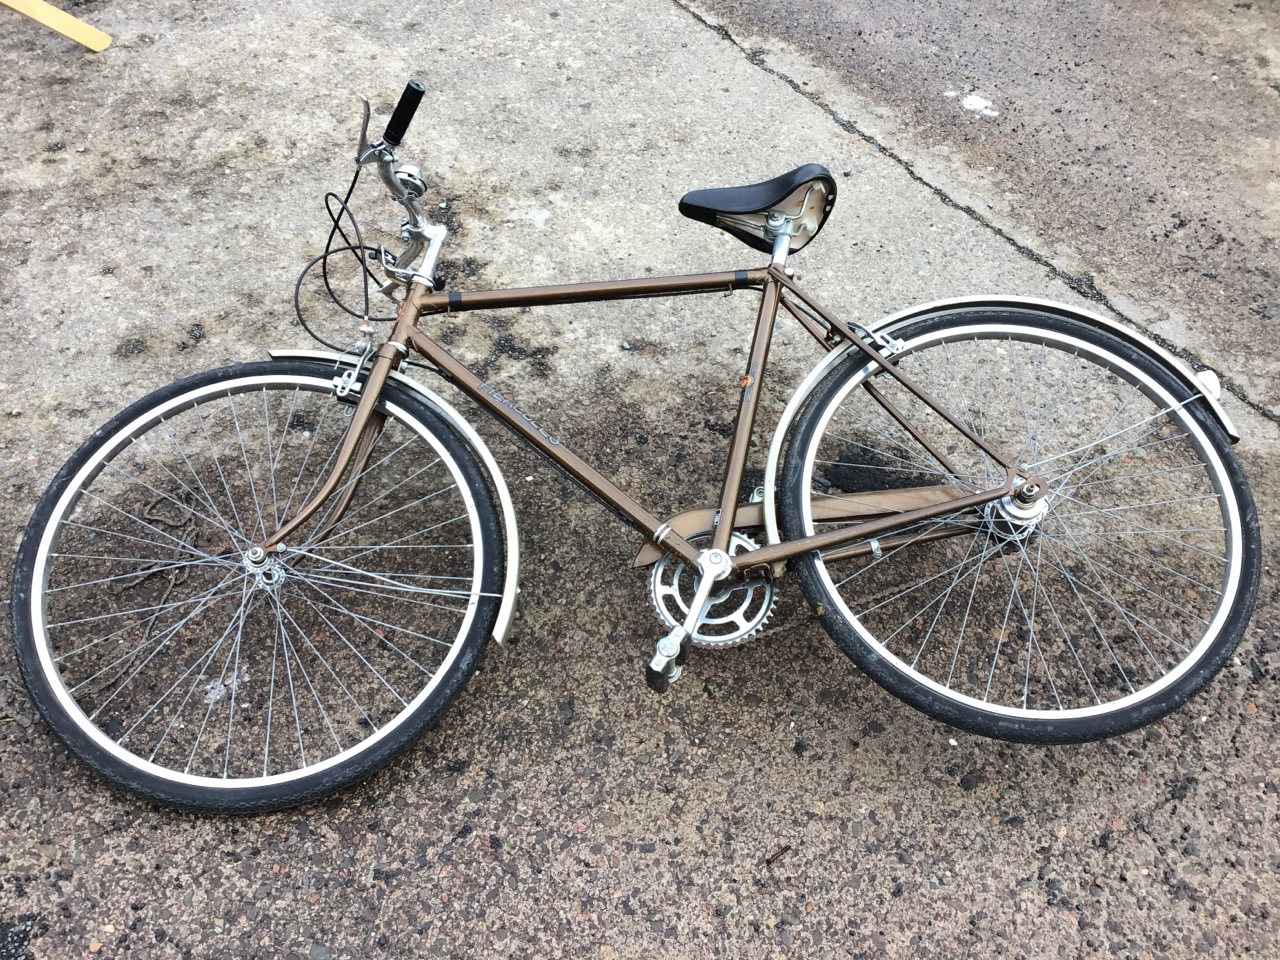 A 1970s Hercules gents bicycle with padded seat, three Sturmey gears, bell, chainguard, mudguards, - Image 3 of 3